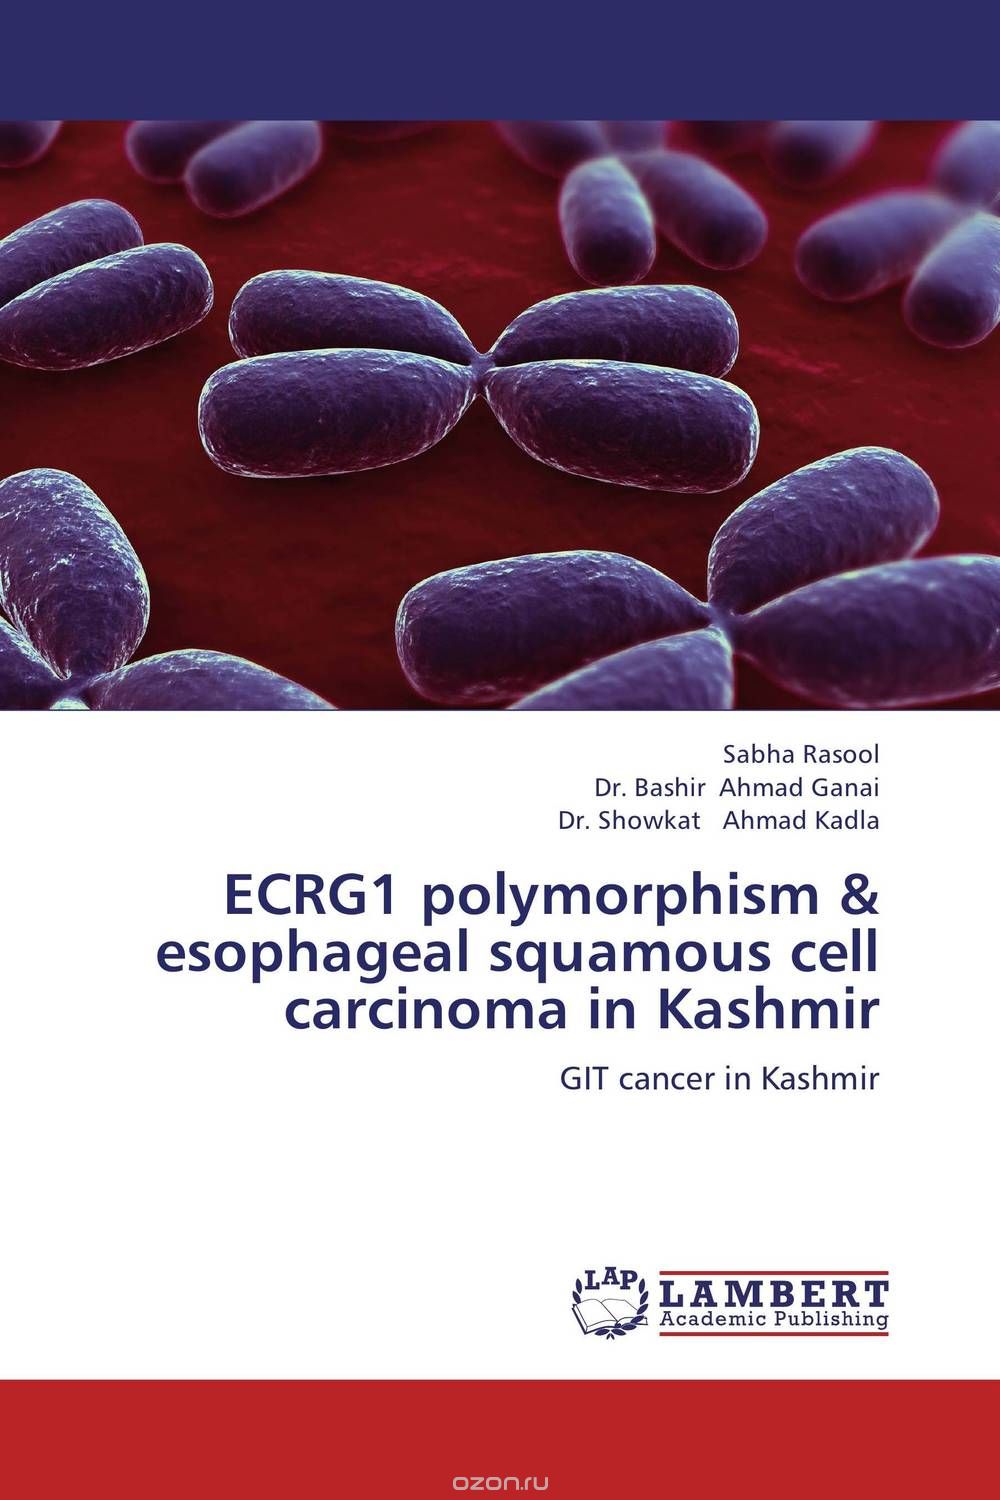 ECRG1 polymorphism & esophageal squamous cell carcinoma in Kashmir